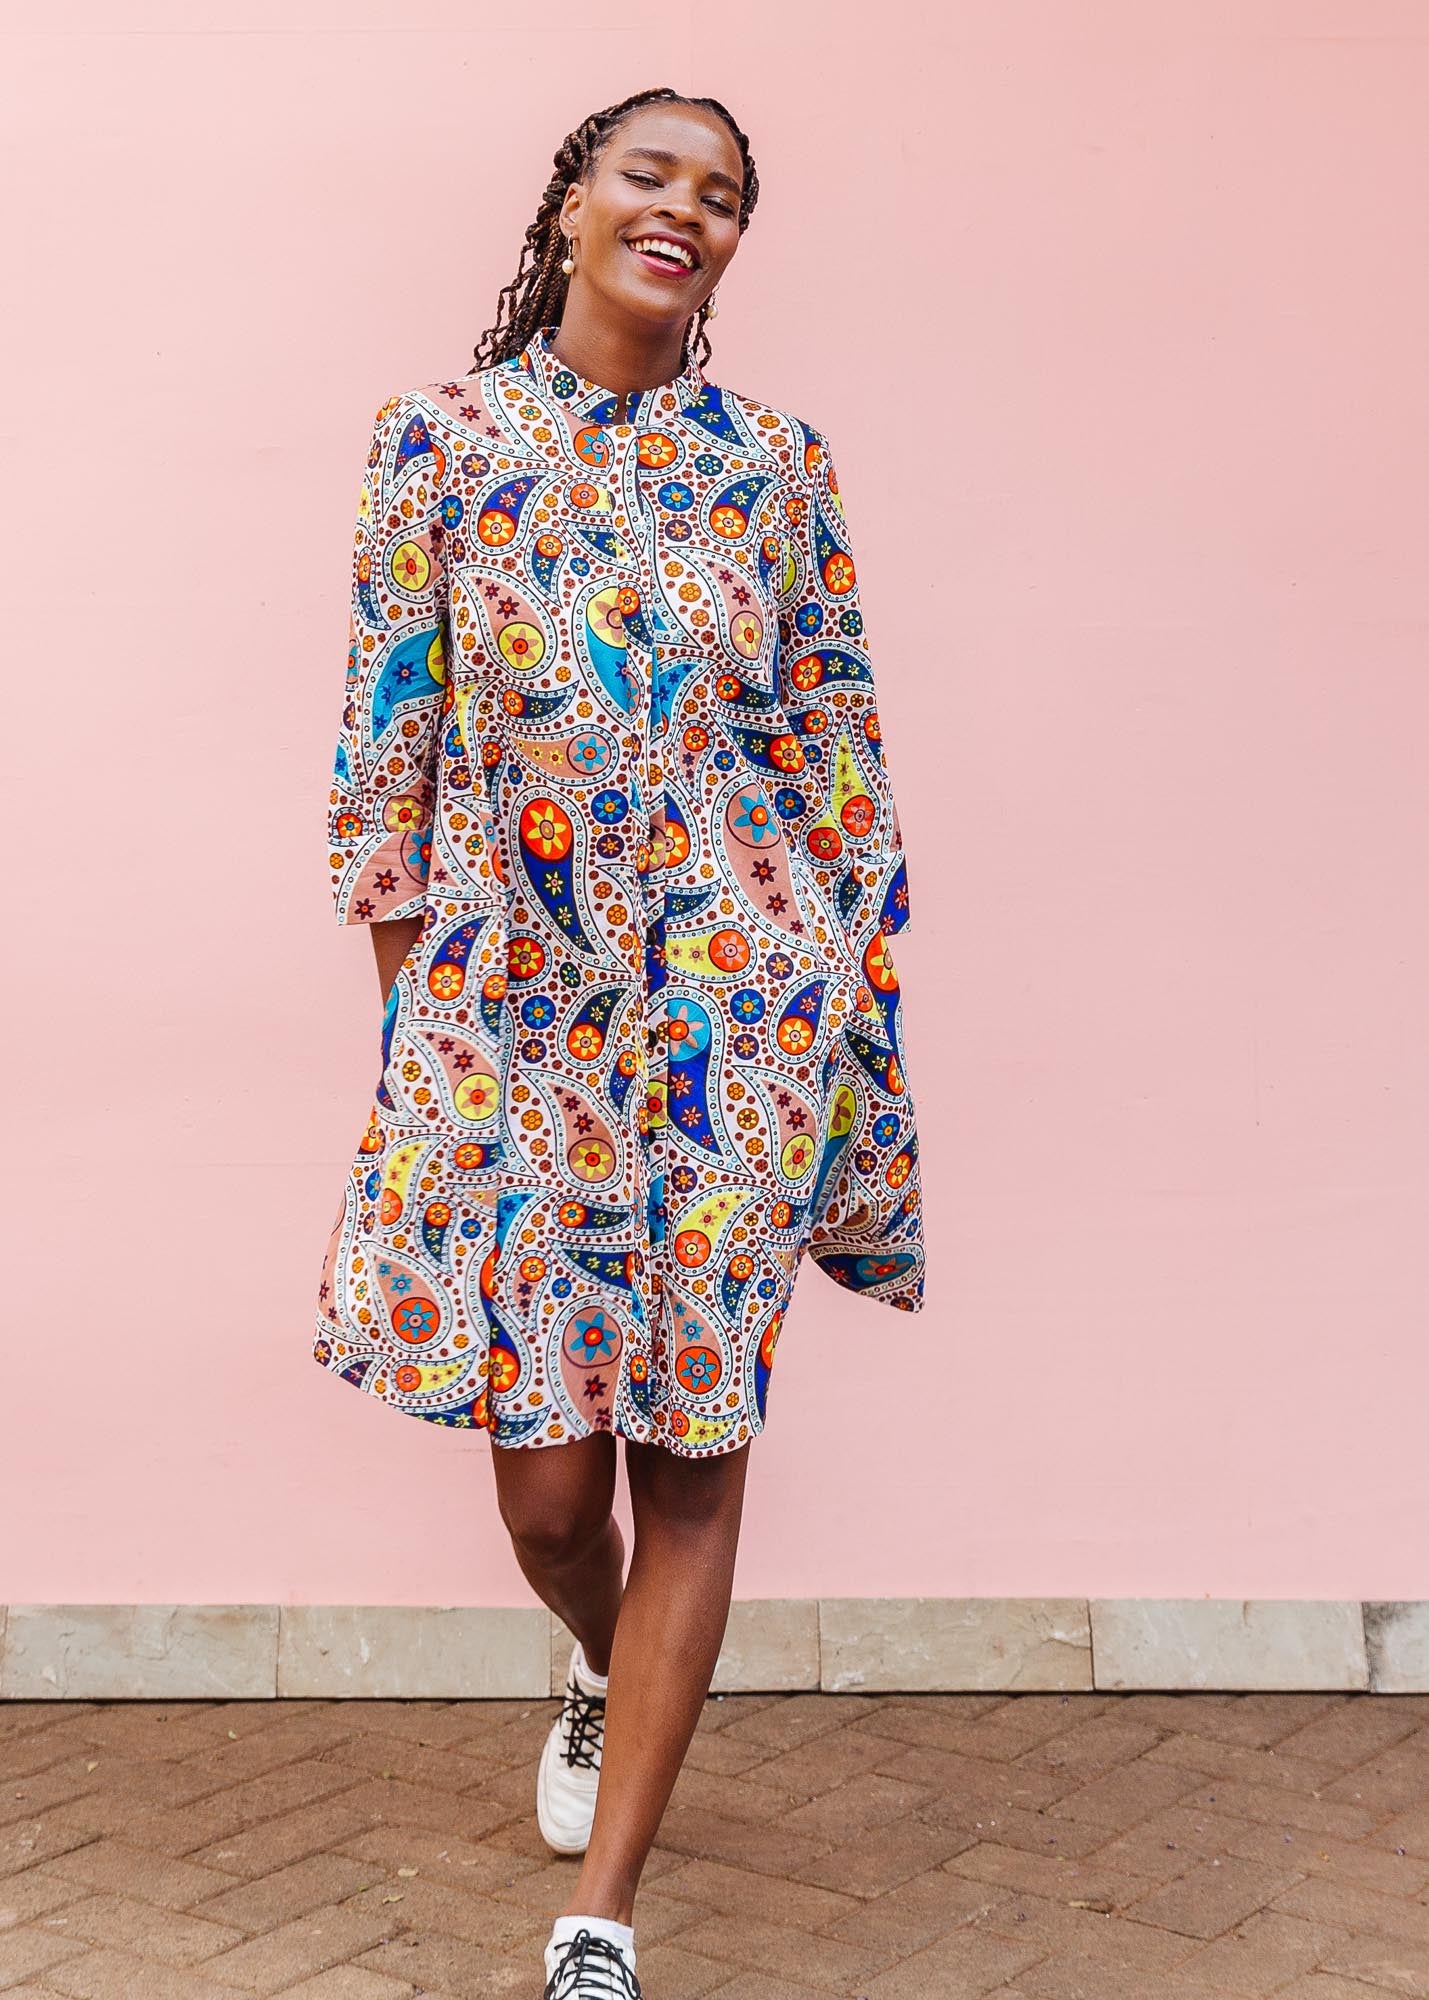 The model is wearing multi-colored paisley print dress